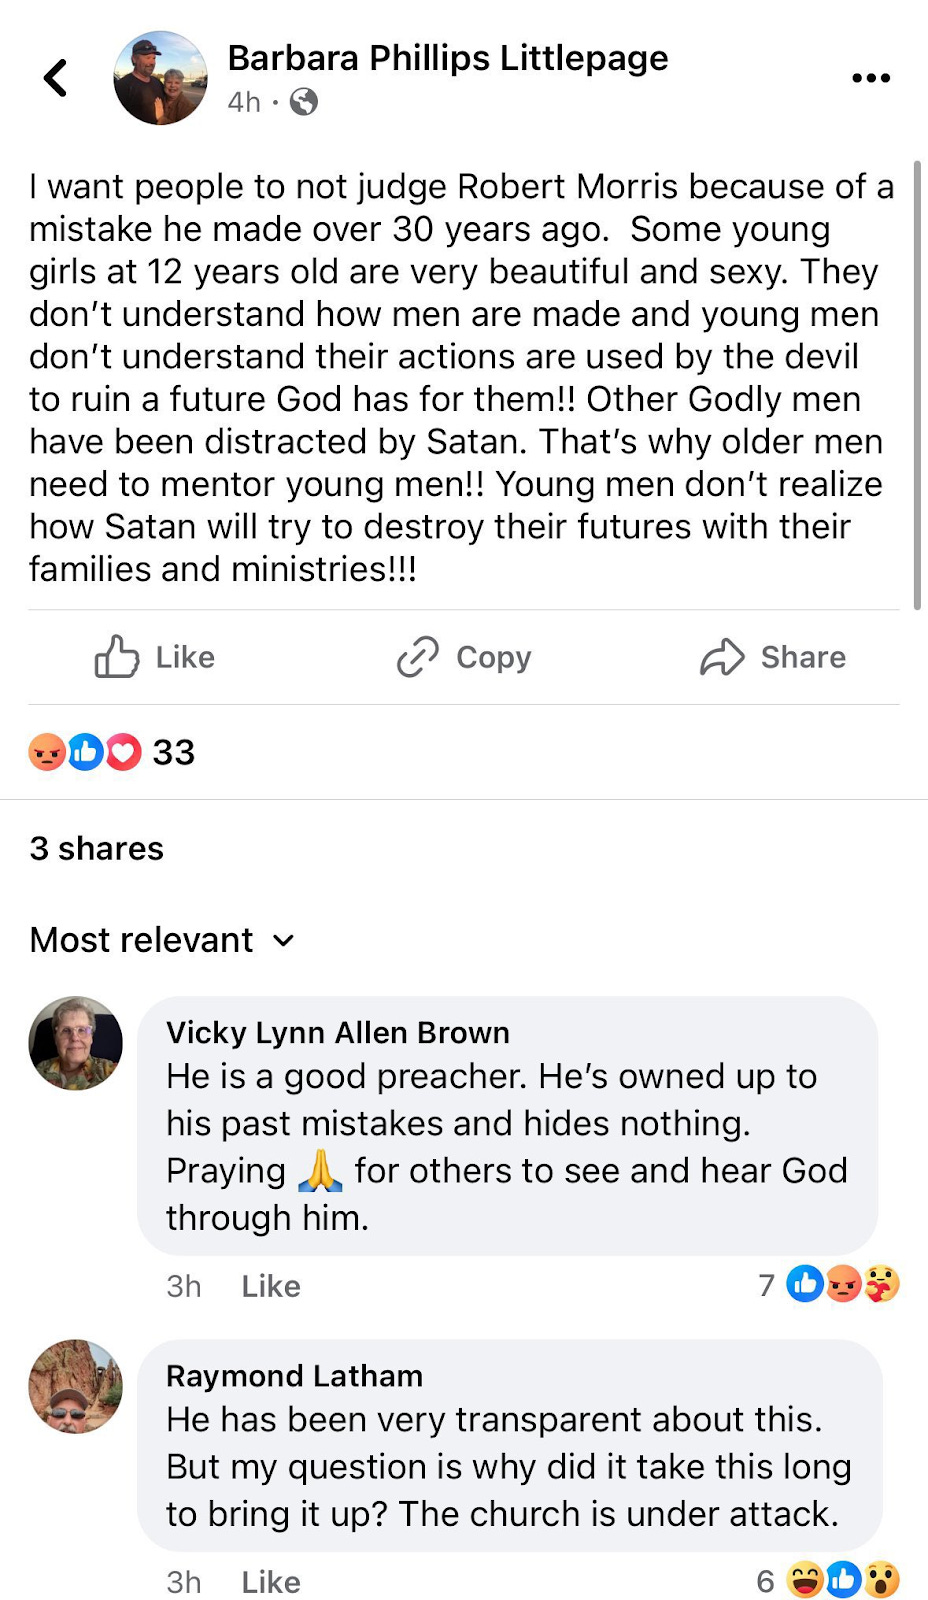 Social media post by Barbara Phillips Littlepage that excustes child rapist pastor Robert Morris for raping a 12-year-old child, saying that girls that age of sexy, and that the churches under attack. Responses to her post excusing his rapist behavior indicates that they believe the church is under attack, and that he did nothing wrong by raping a 12-year-old girl. 